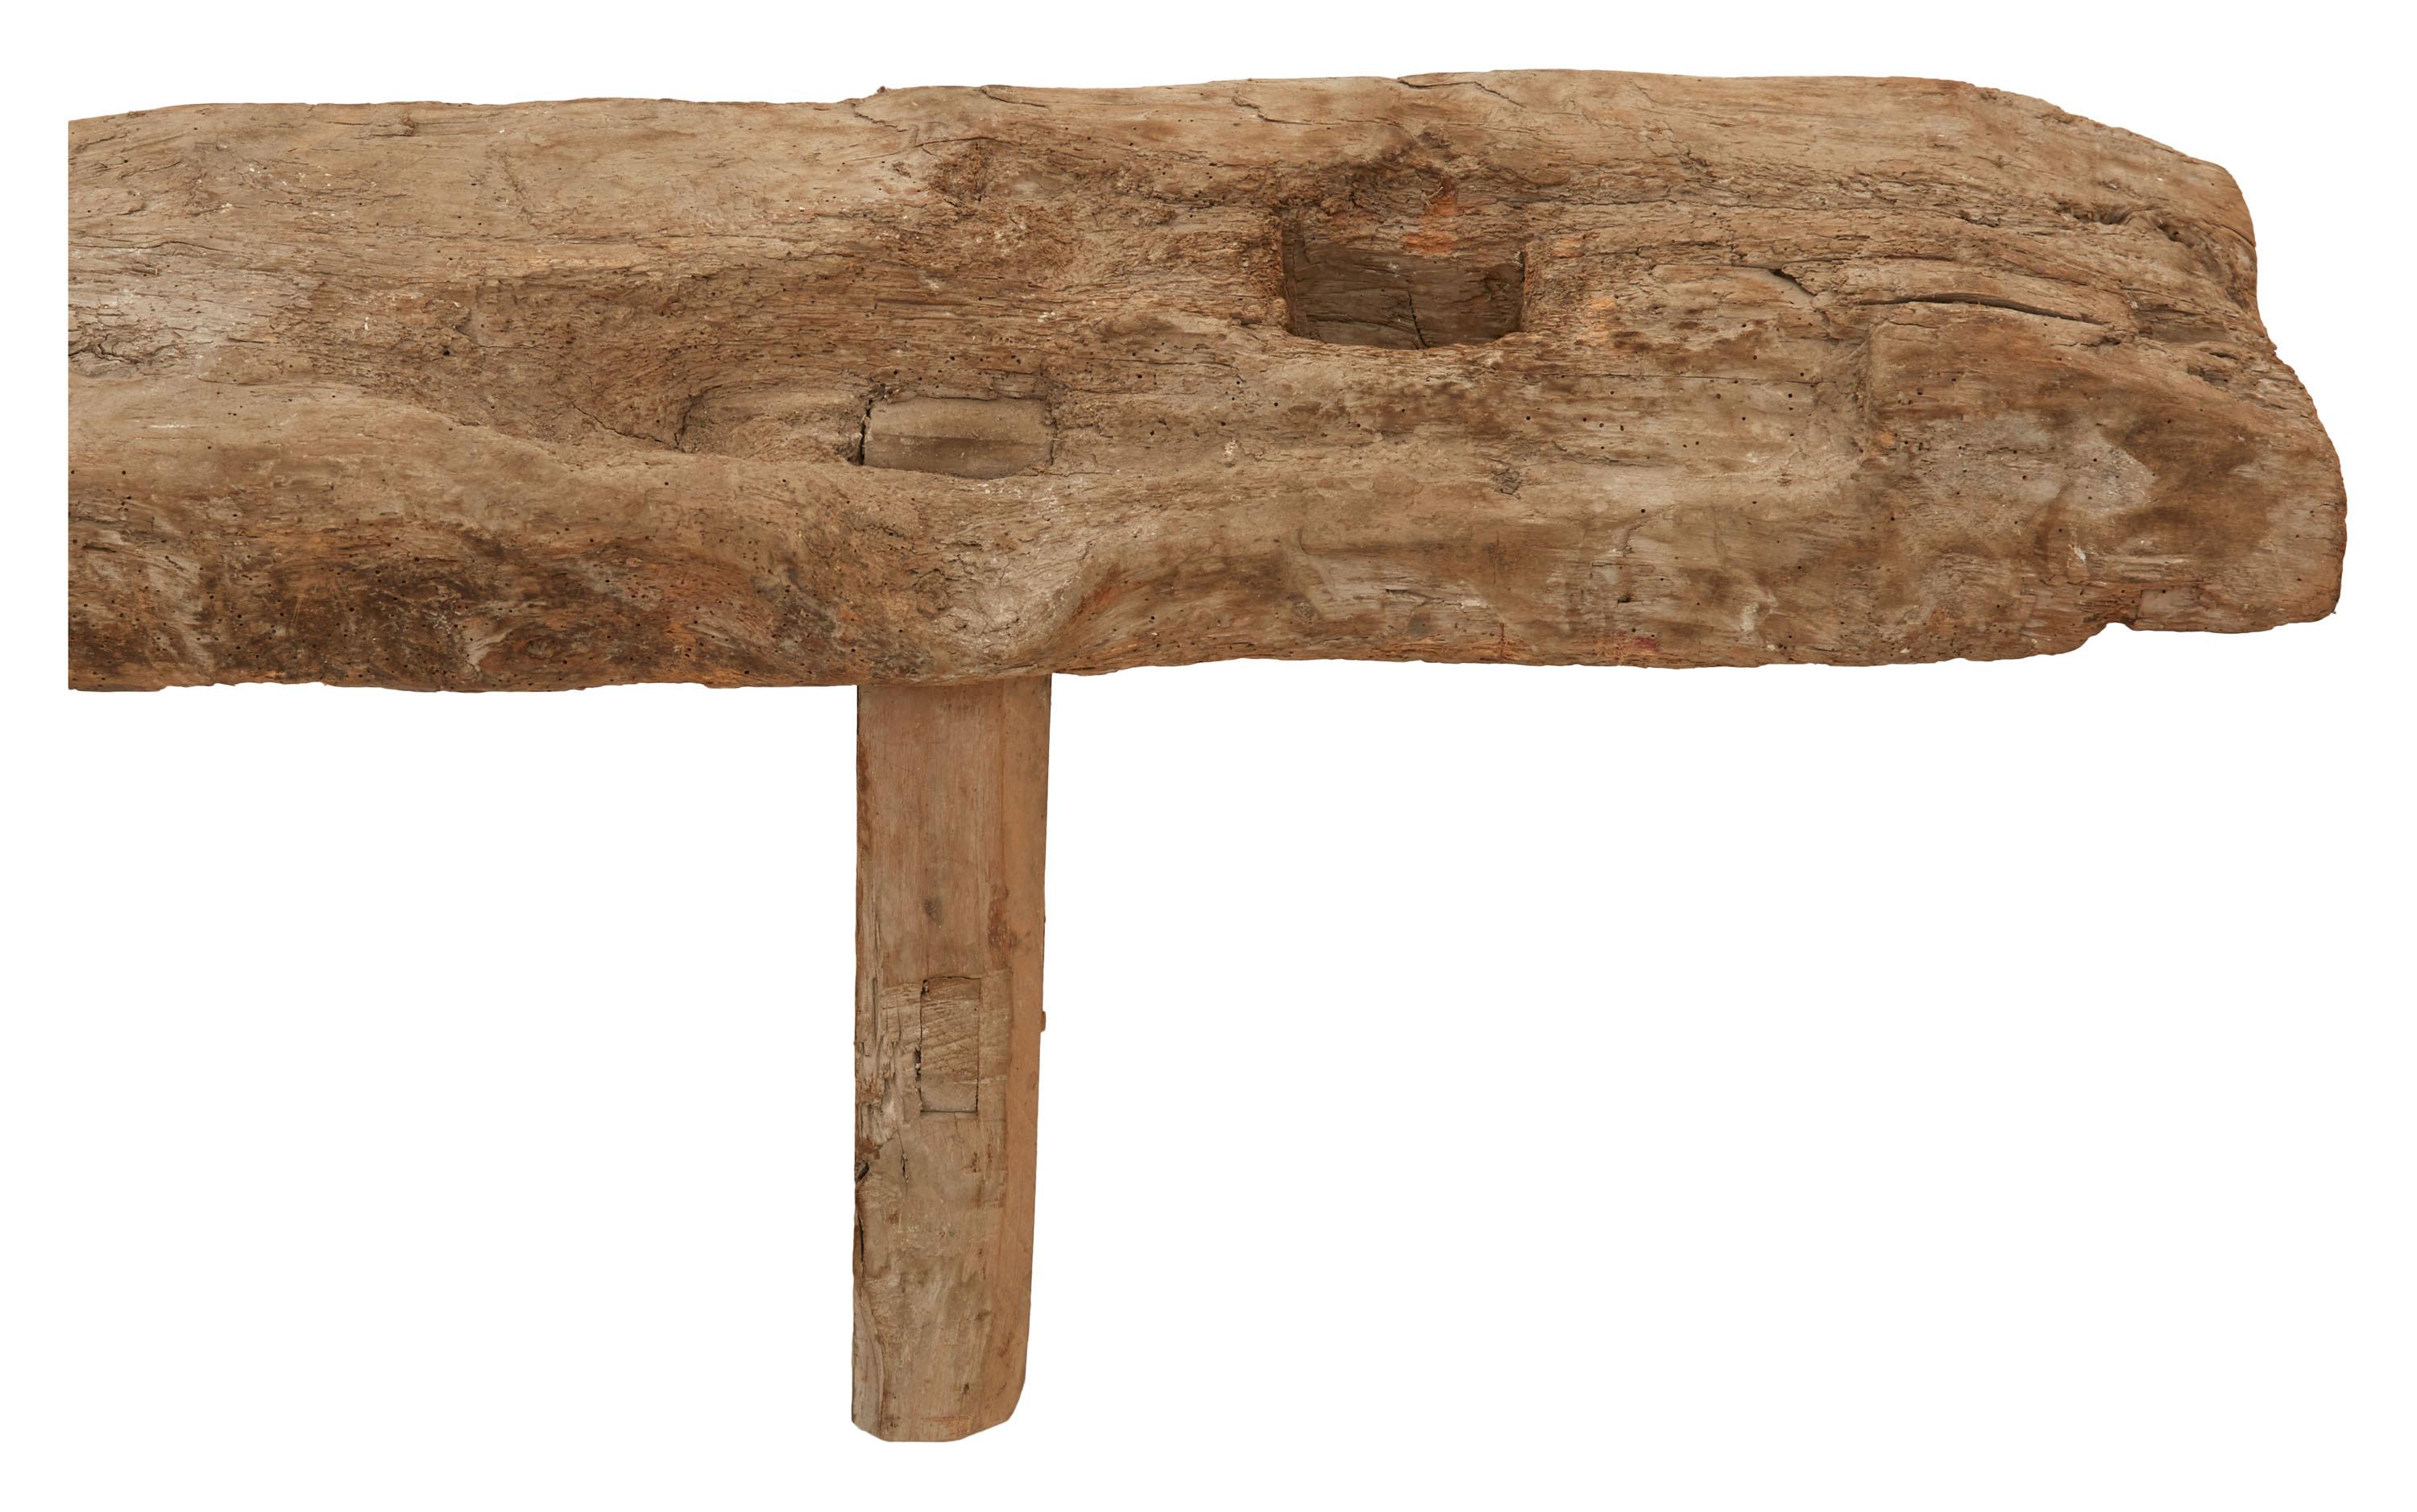 Hand-Carved 19th Century Rustic Hand Hewn Wood Bench